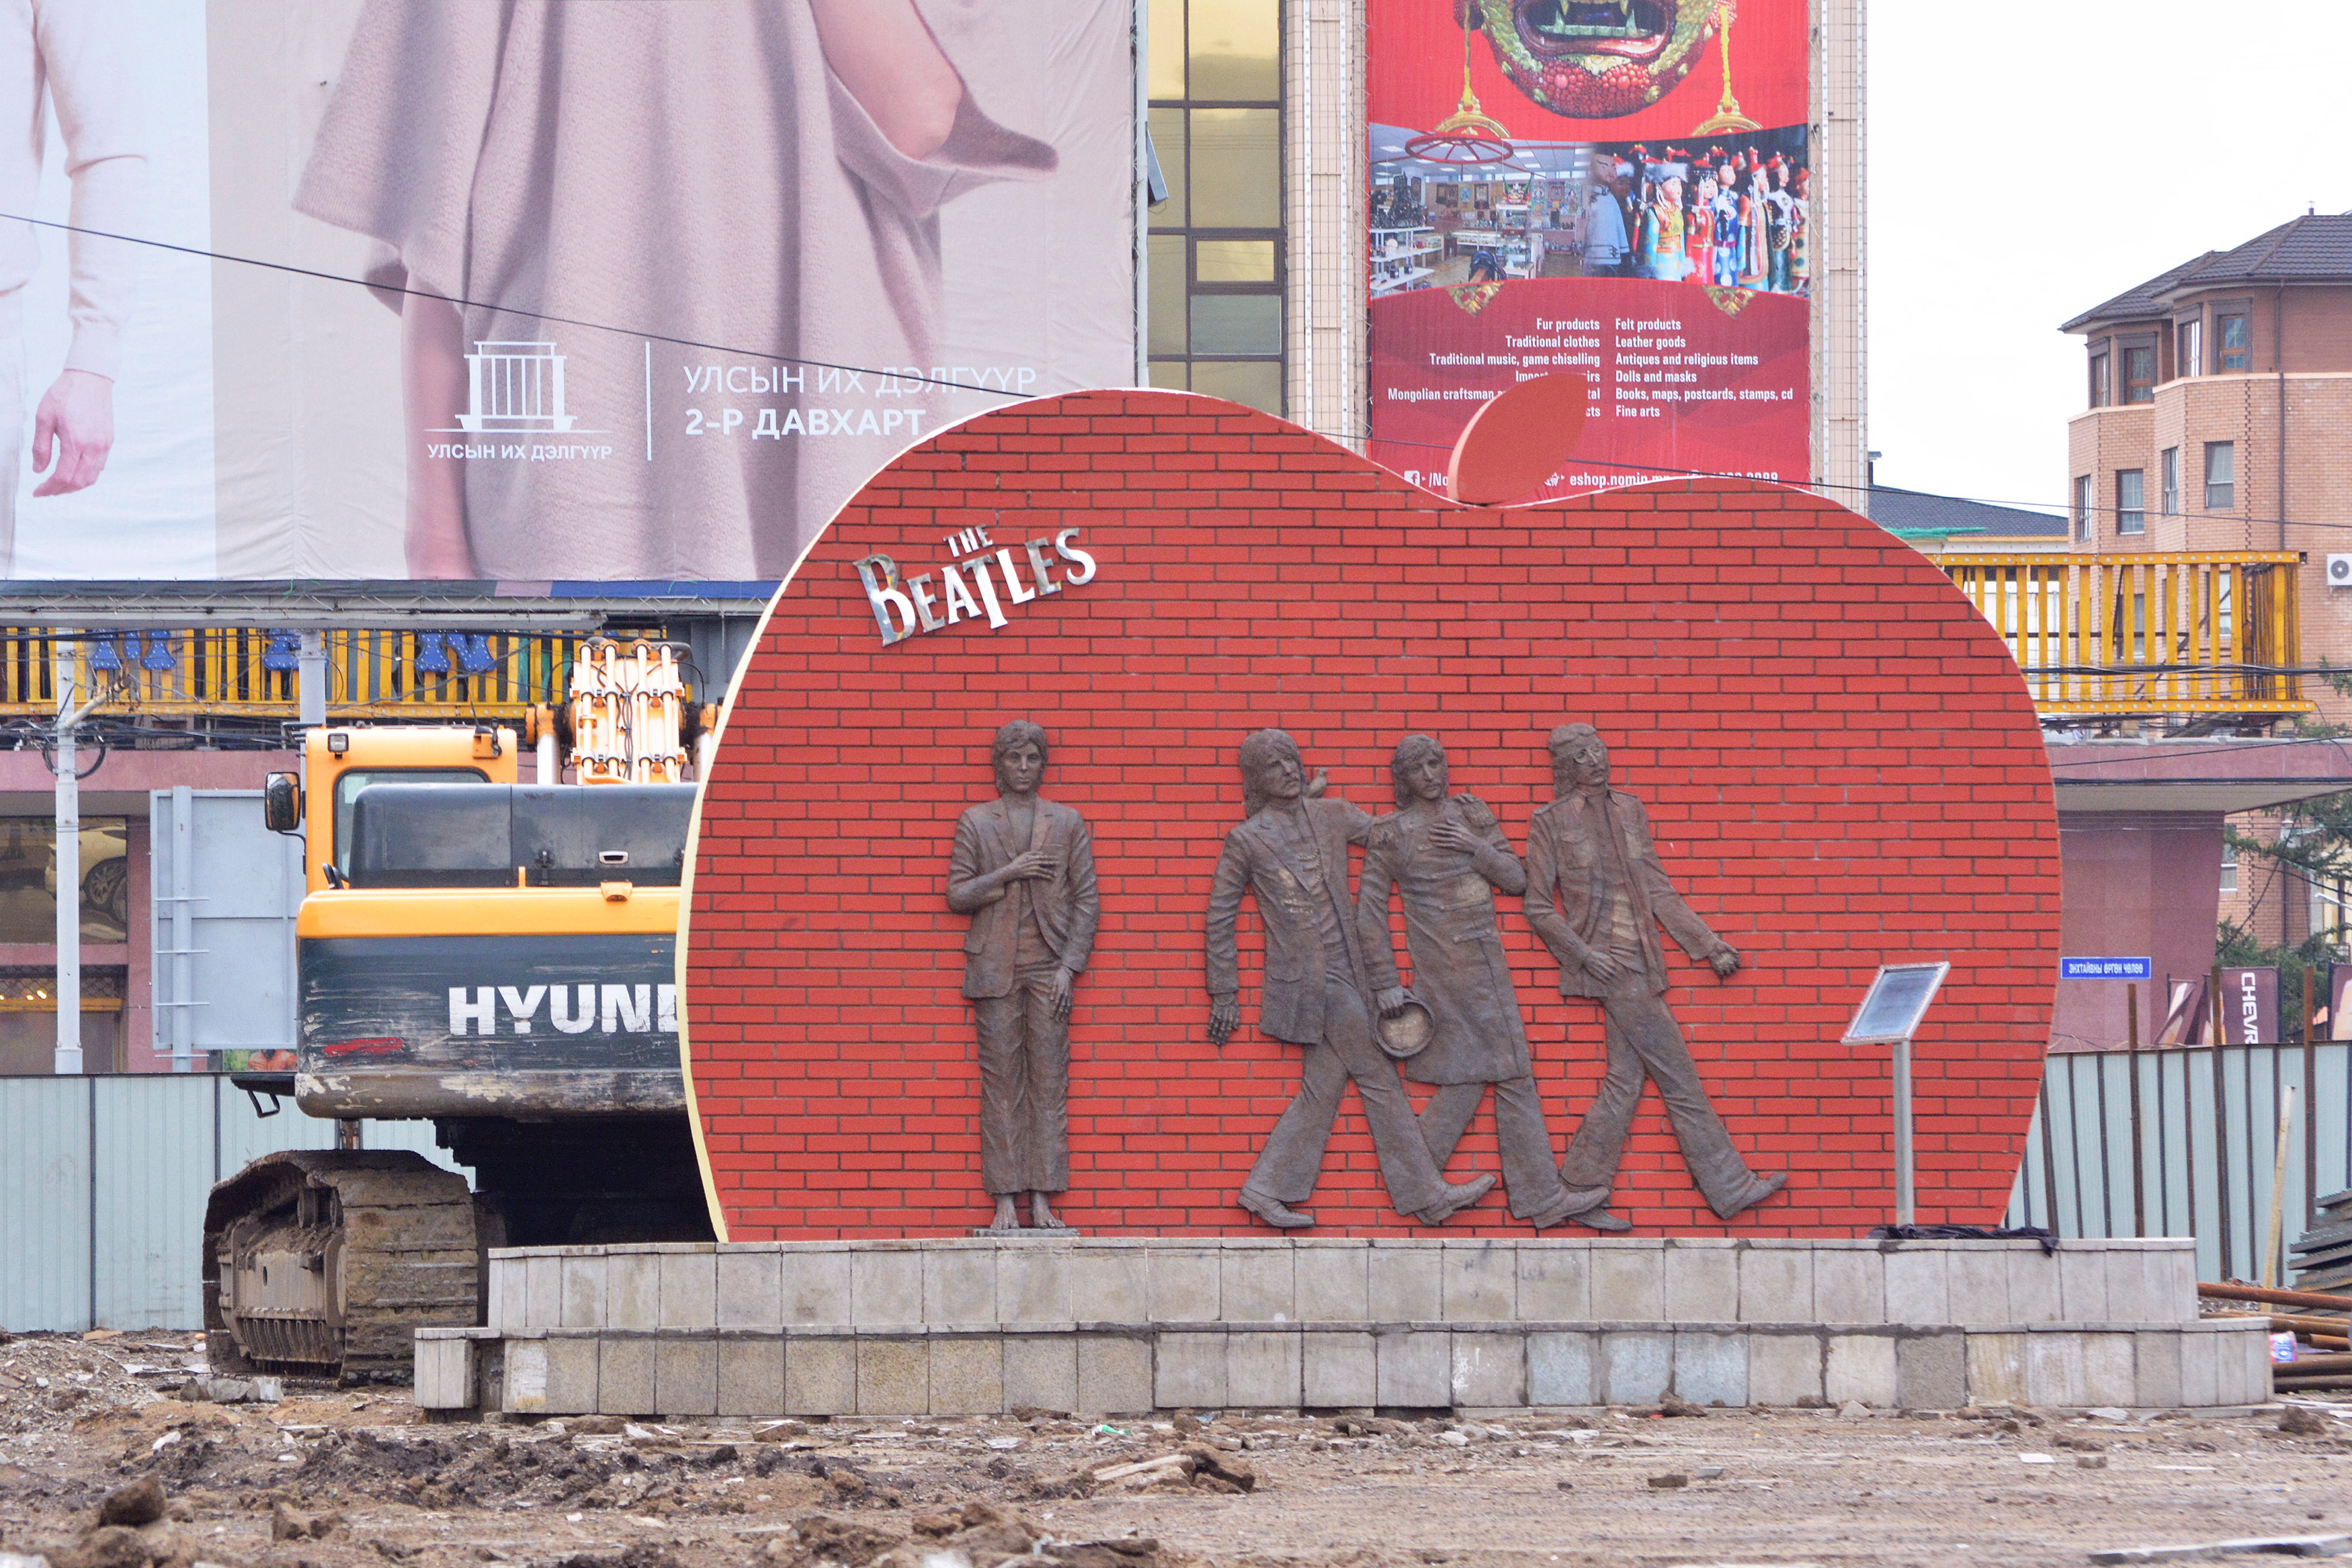 Mongolians up in arms as bulldozers threaten Beatles monument